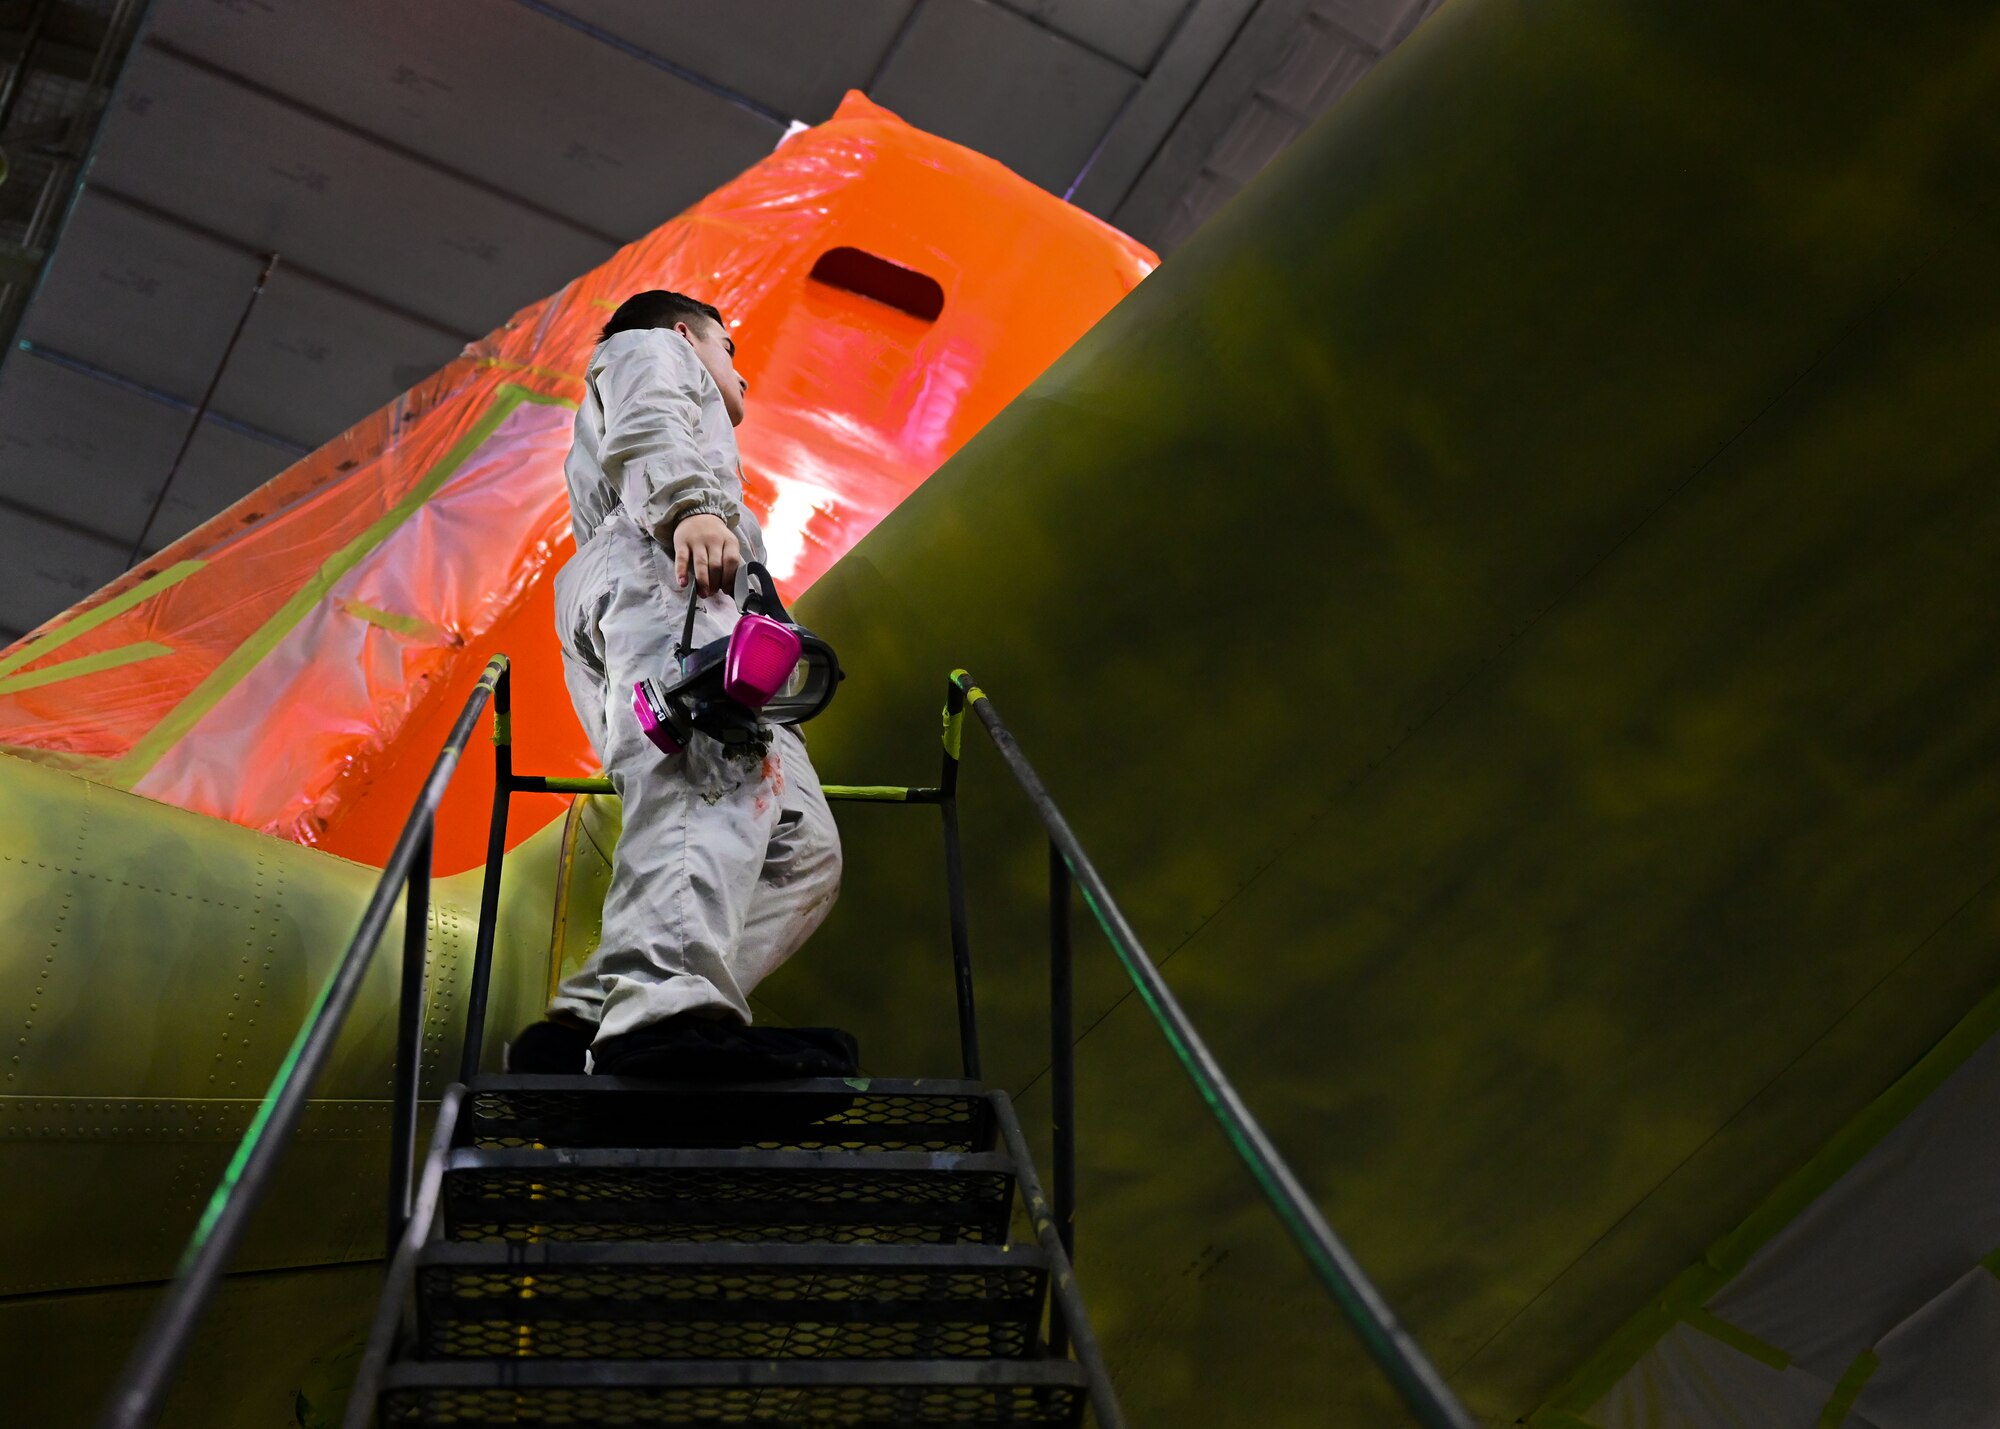 An Airman in a white suit speaks with another Airman on a set of stairs next to a C-130J.